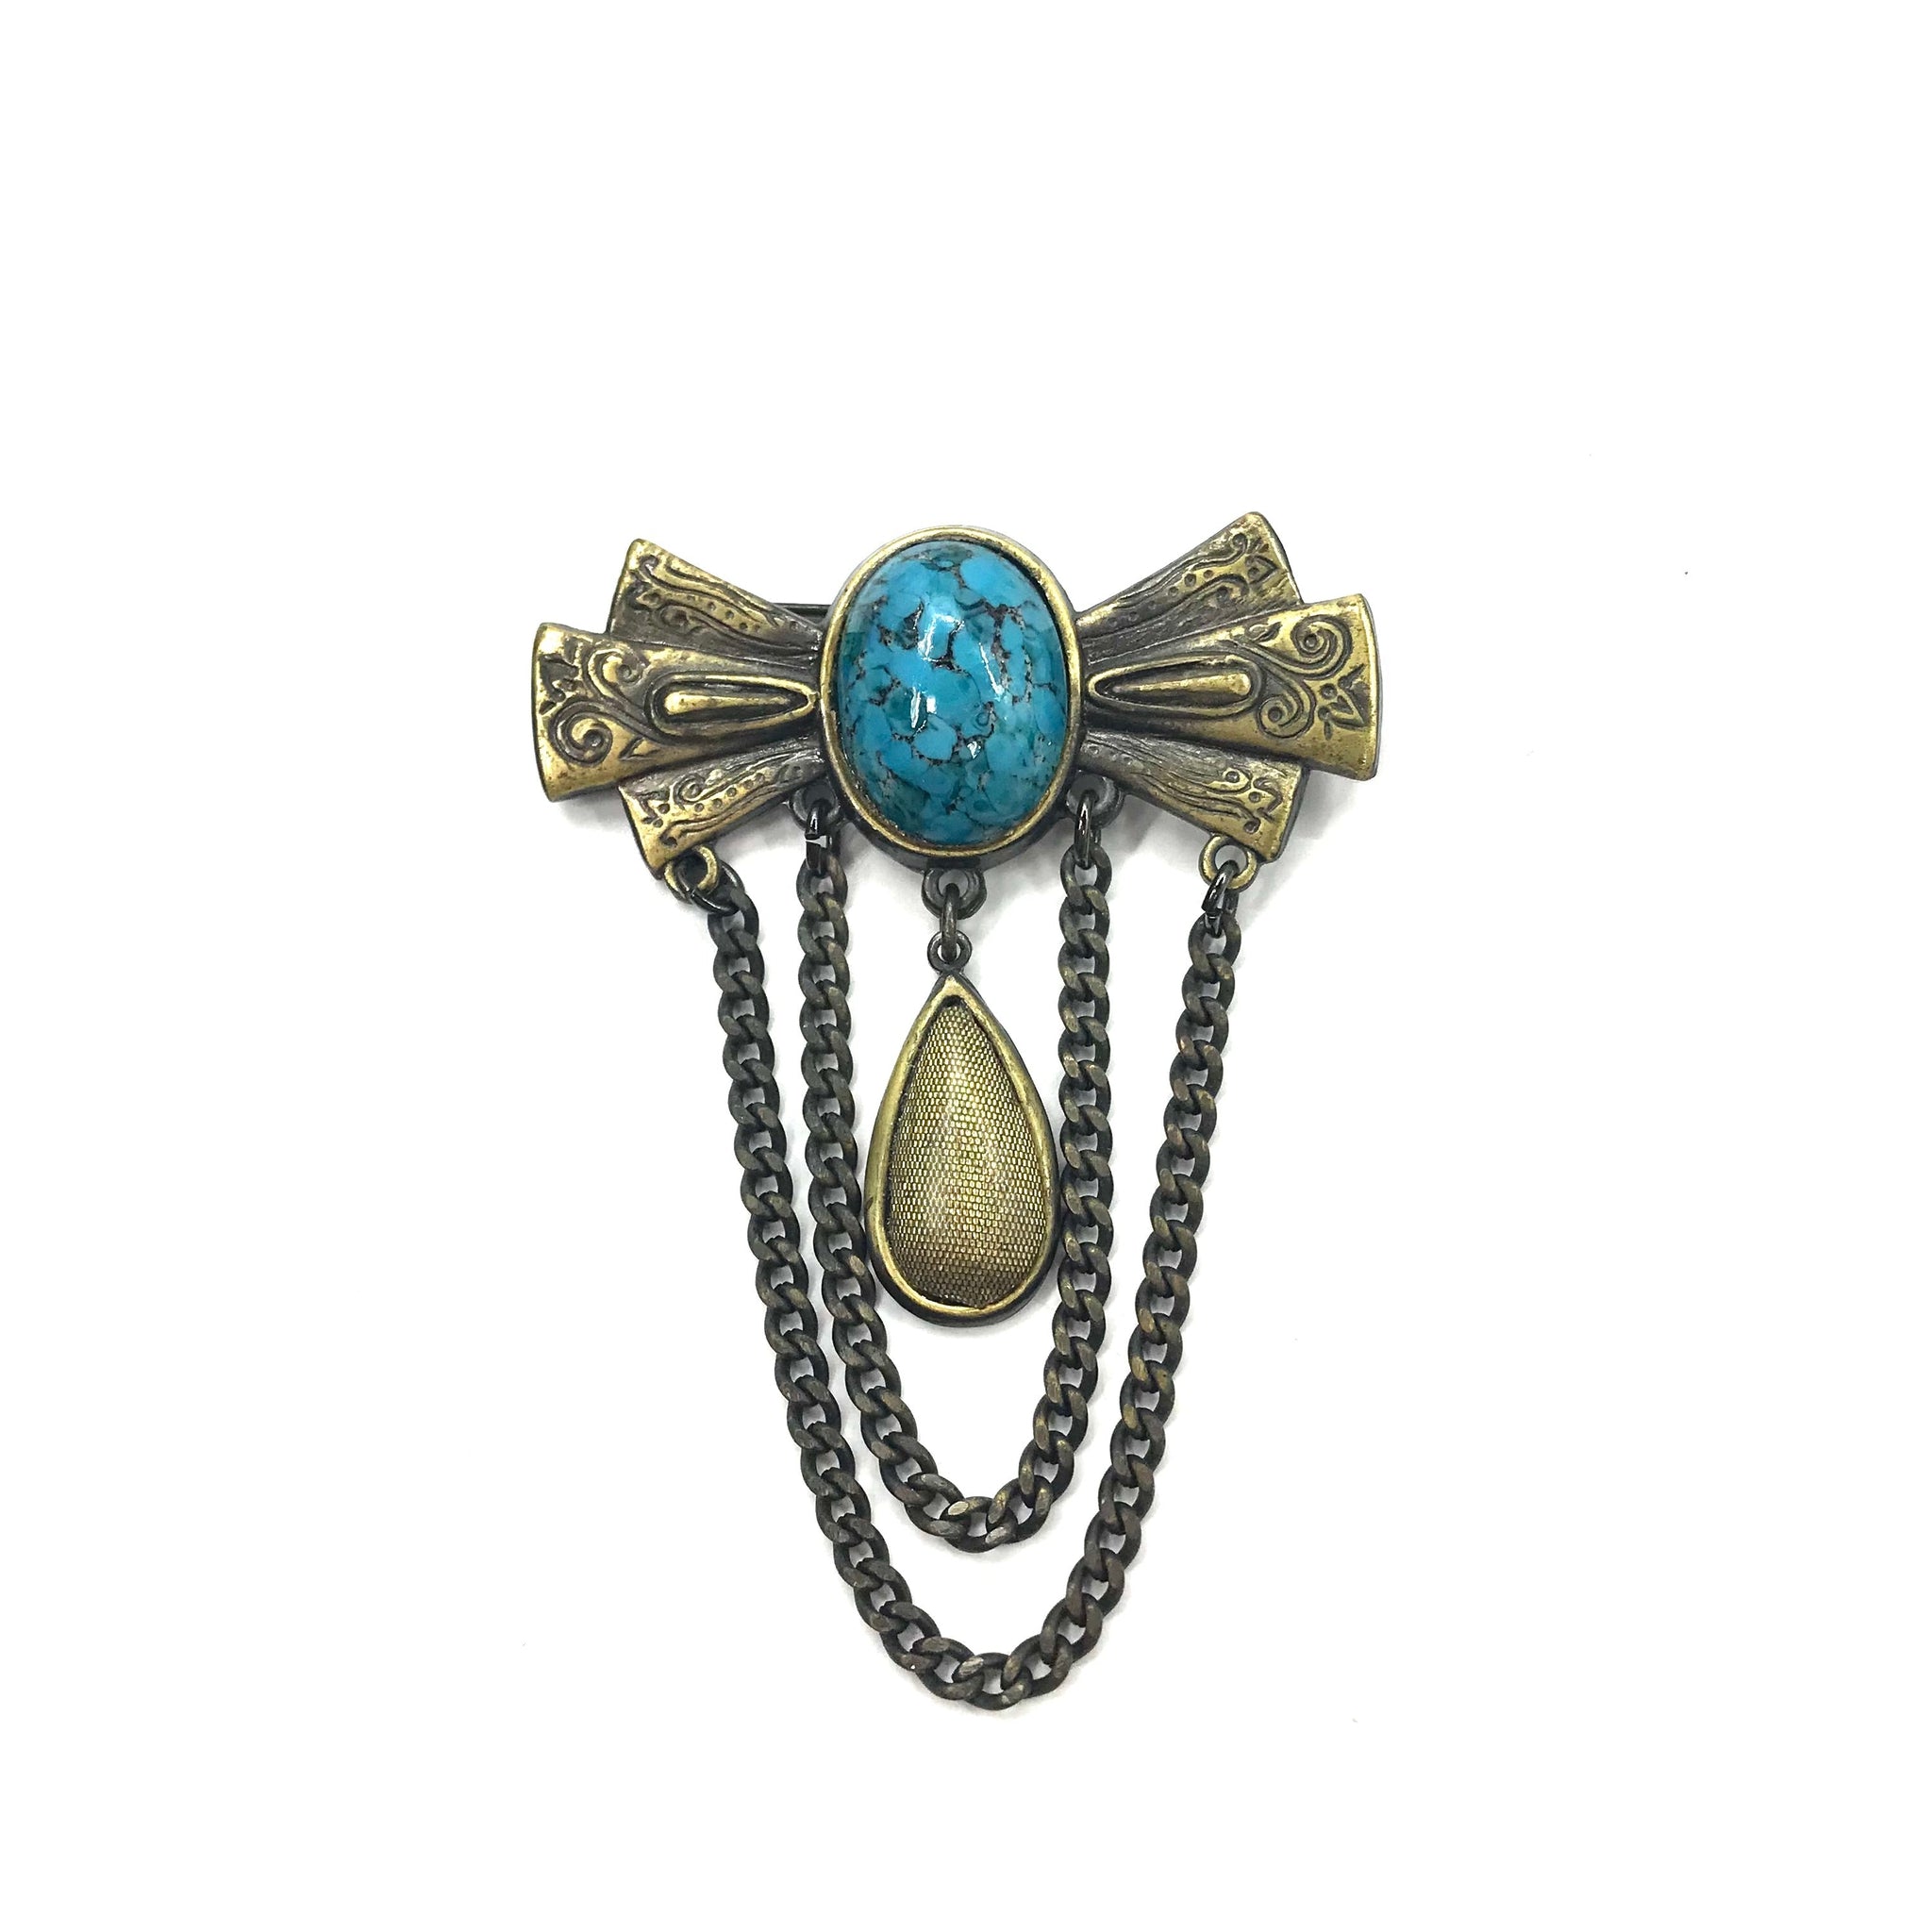 Vintage Turquoise Broach ヴィンテージ ターコイズ ブローチ ブルー ...